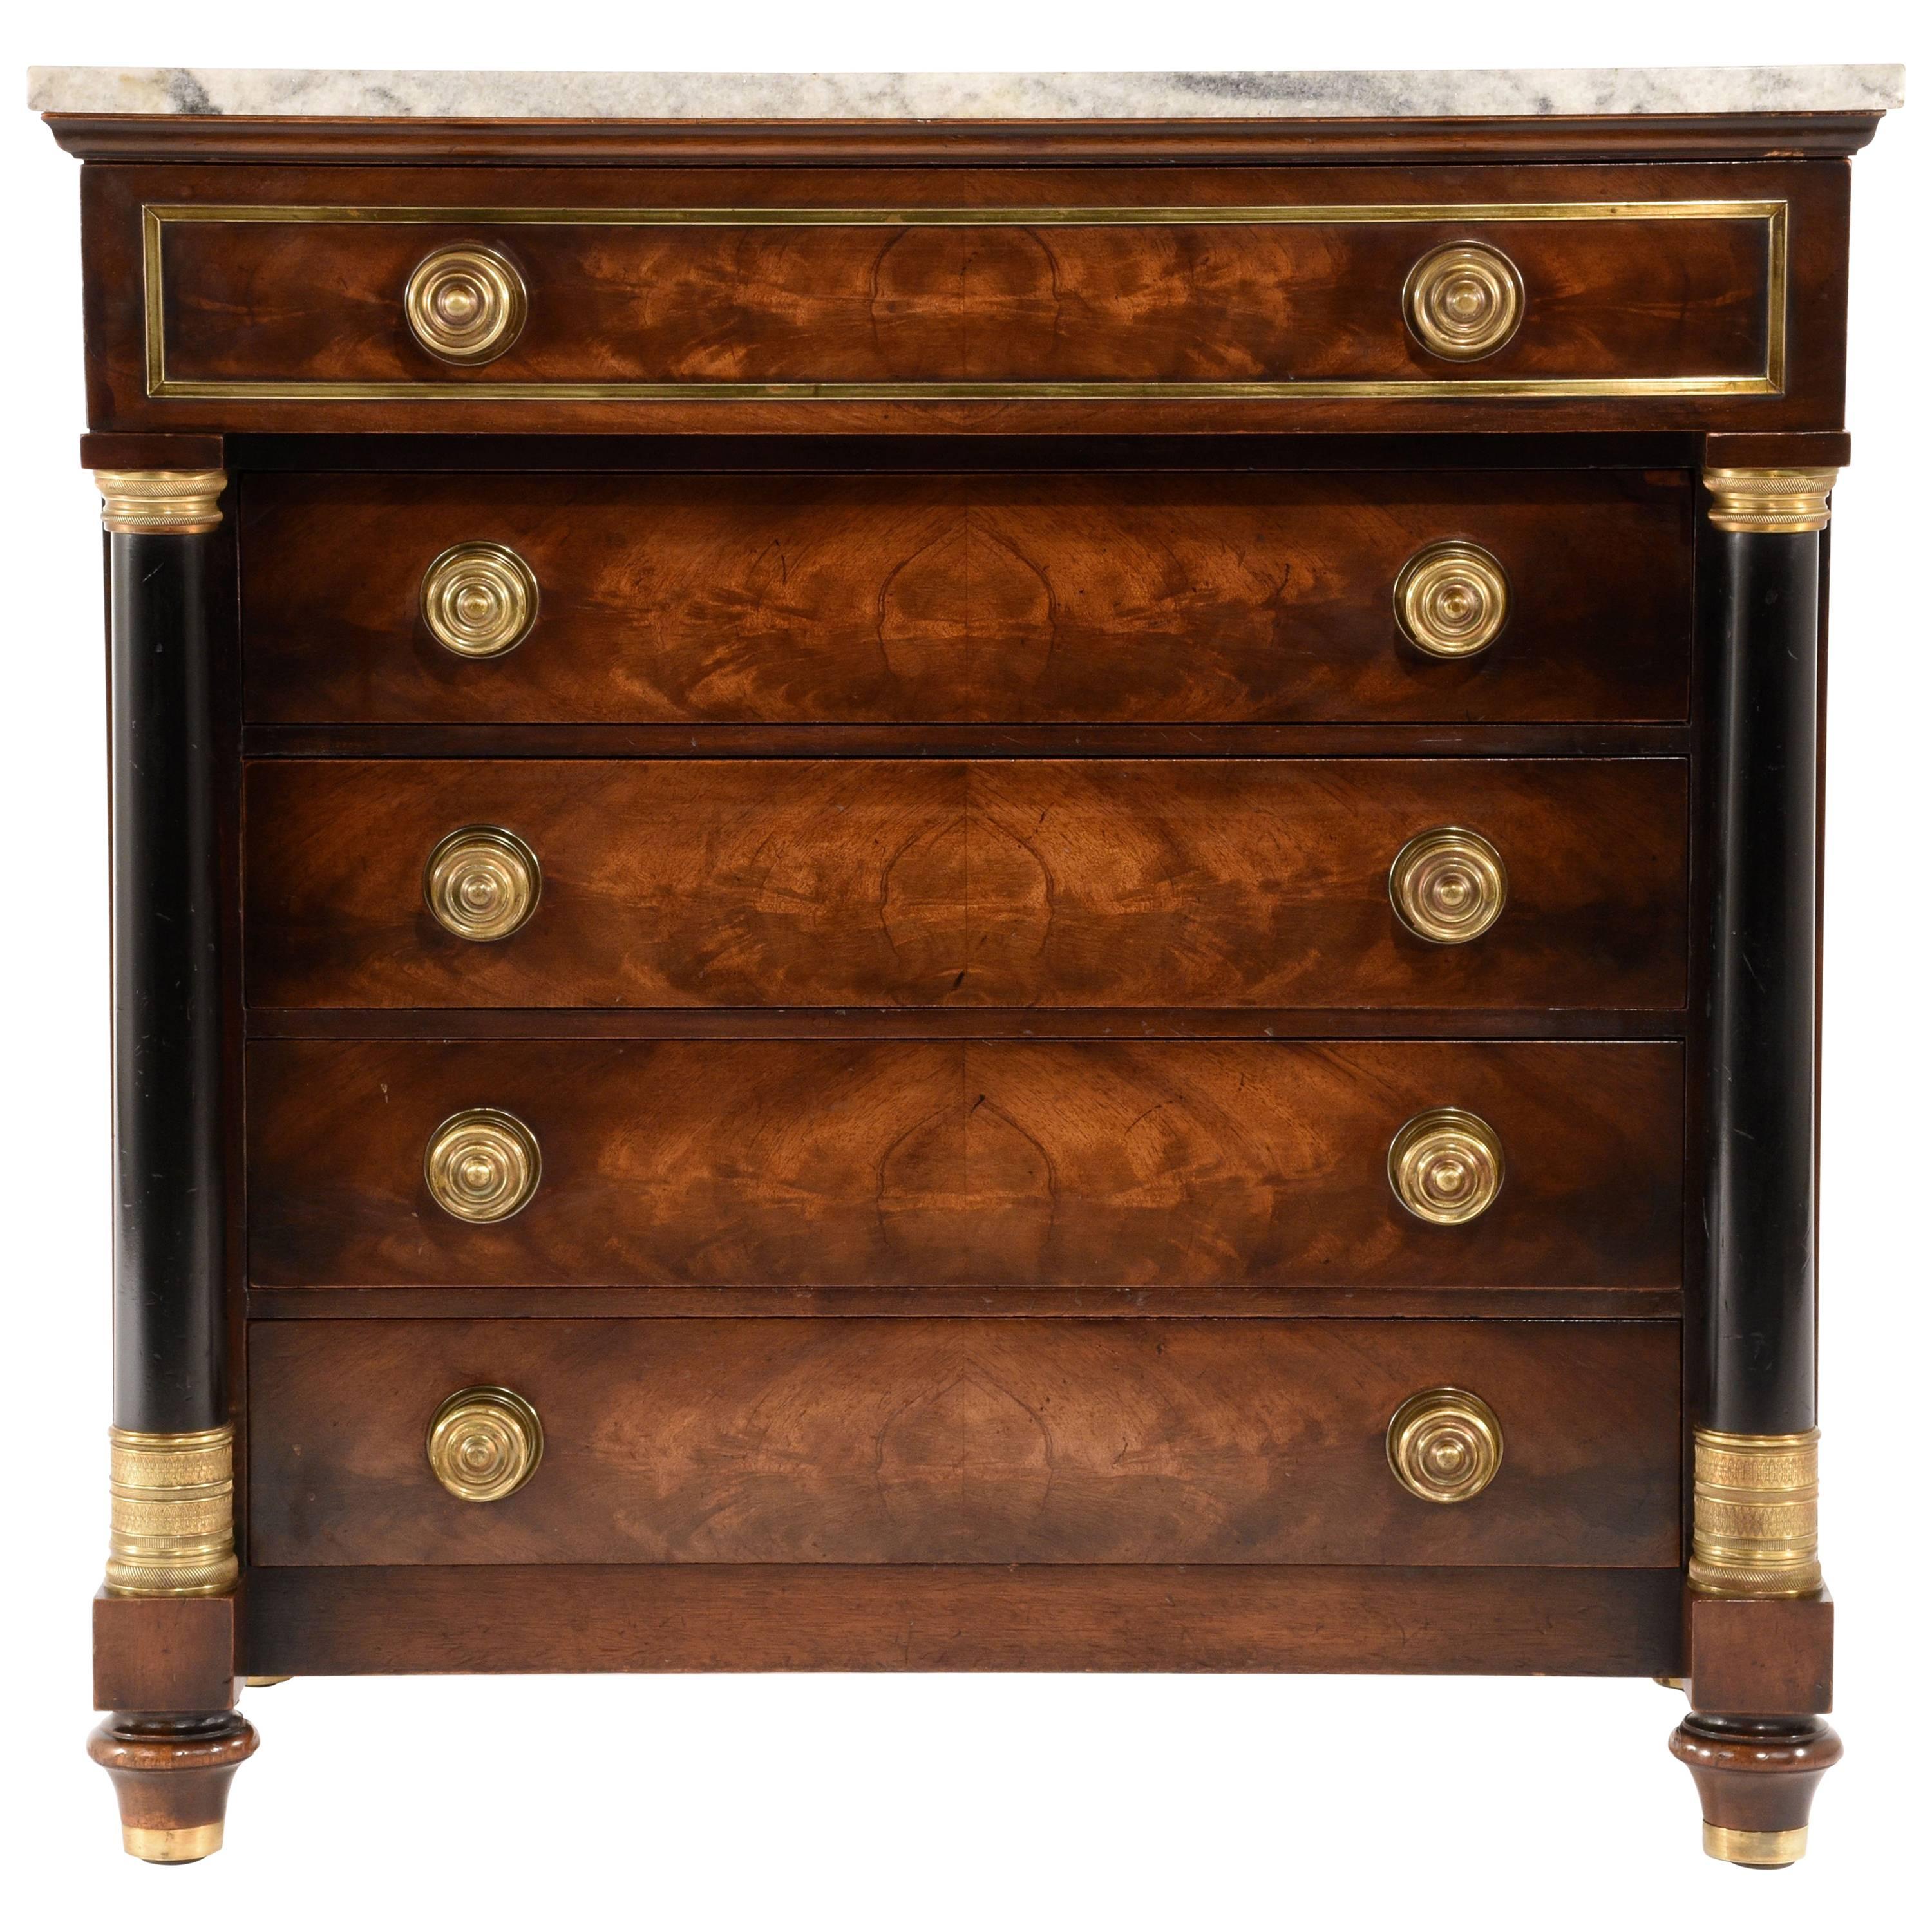 Vintage Empire-Style Small Chest of Drawers